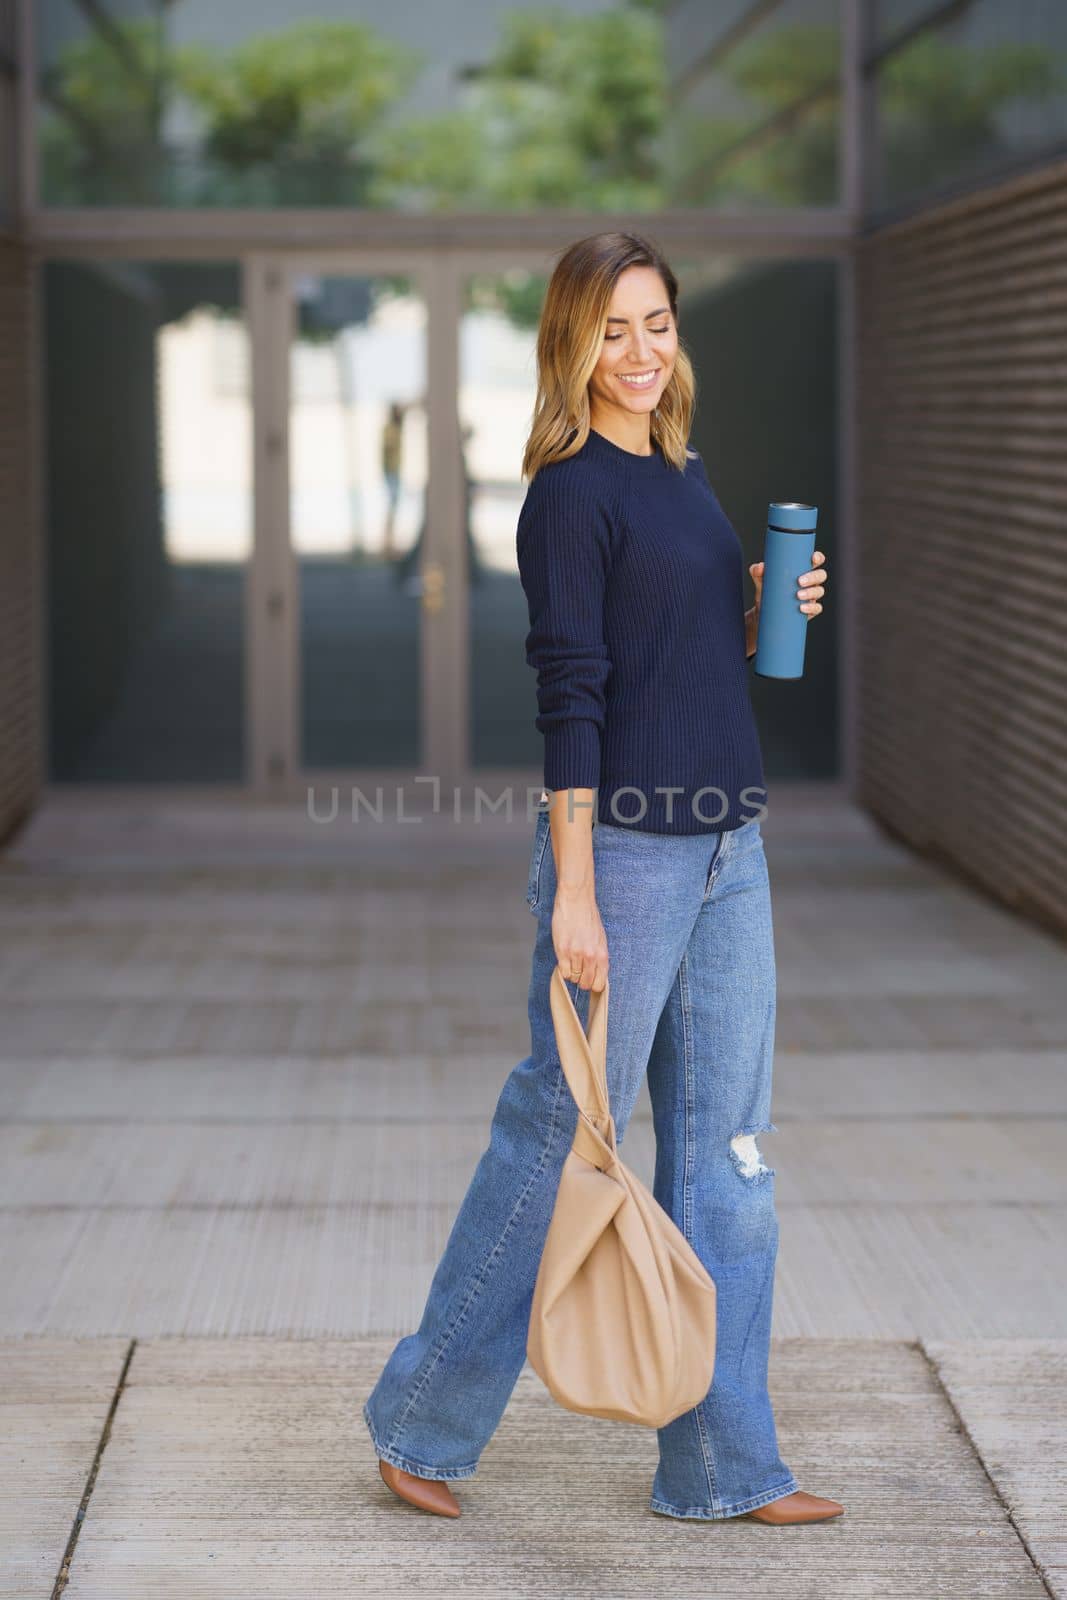 Full body positive stylish woman with thermos and bag closing eyes and smiling while walking on pavement outside modern building